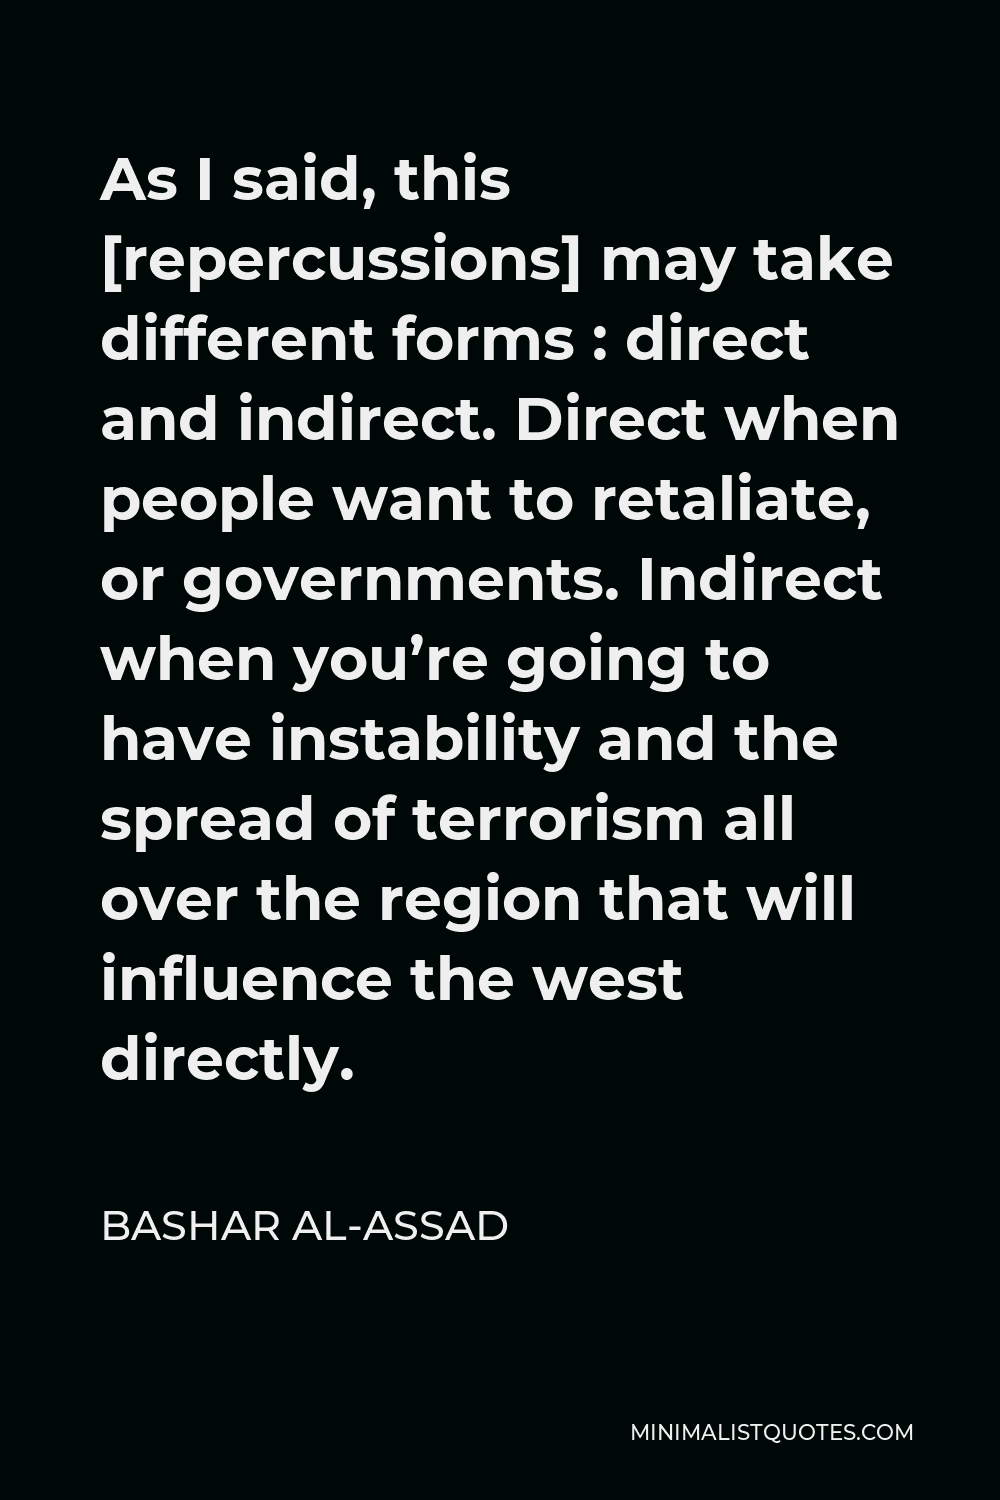 Bashar al-Assad Quote - As I said, this [repercussions] may take different forms : direct and indirect. Direct when people want to retaliate, or governments. Indirect when you’re going to have instability and the spread of terrorism all over the region that will influence the west directly.